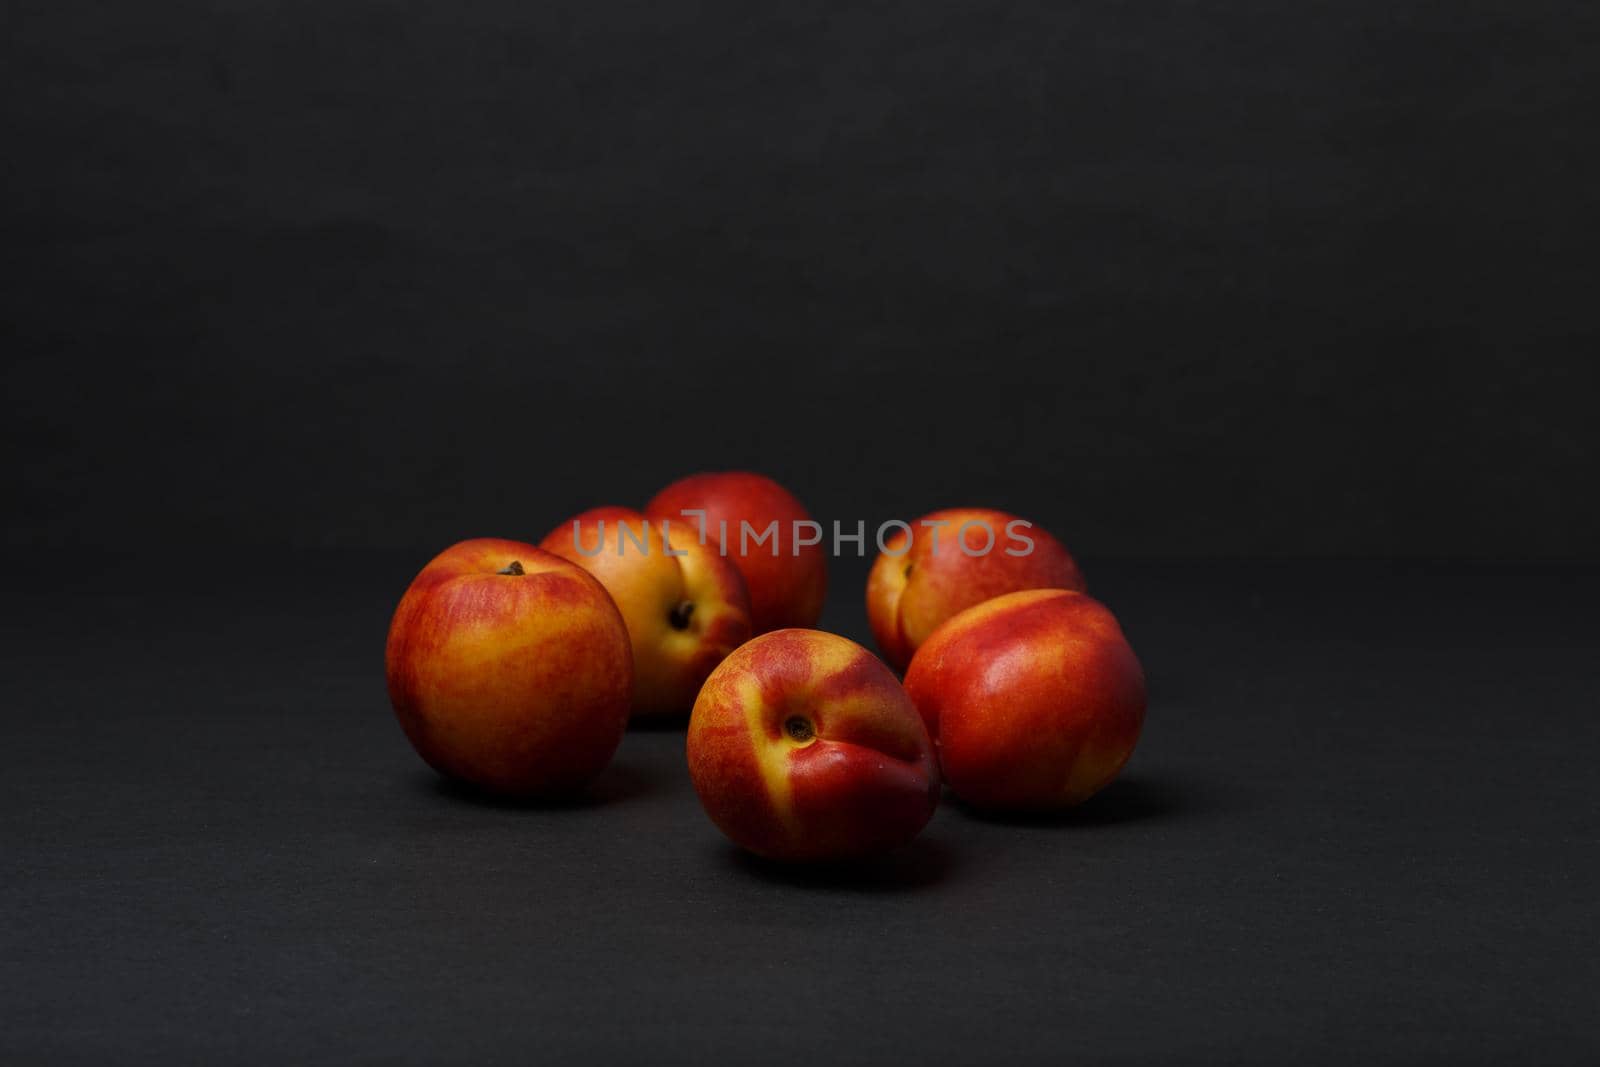 Bunch of nectarines on black table against black background with copy space by Senorina_Irina